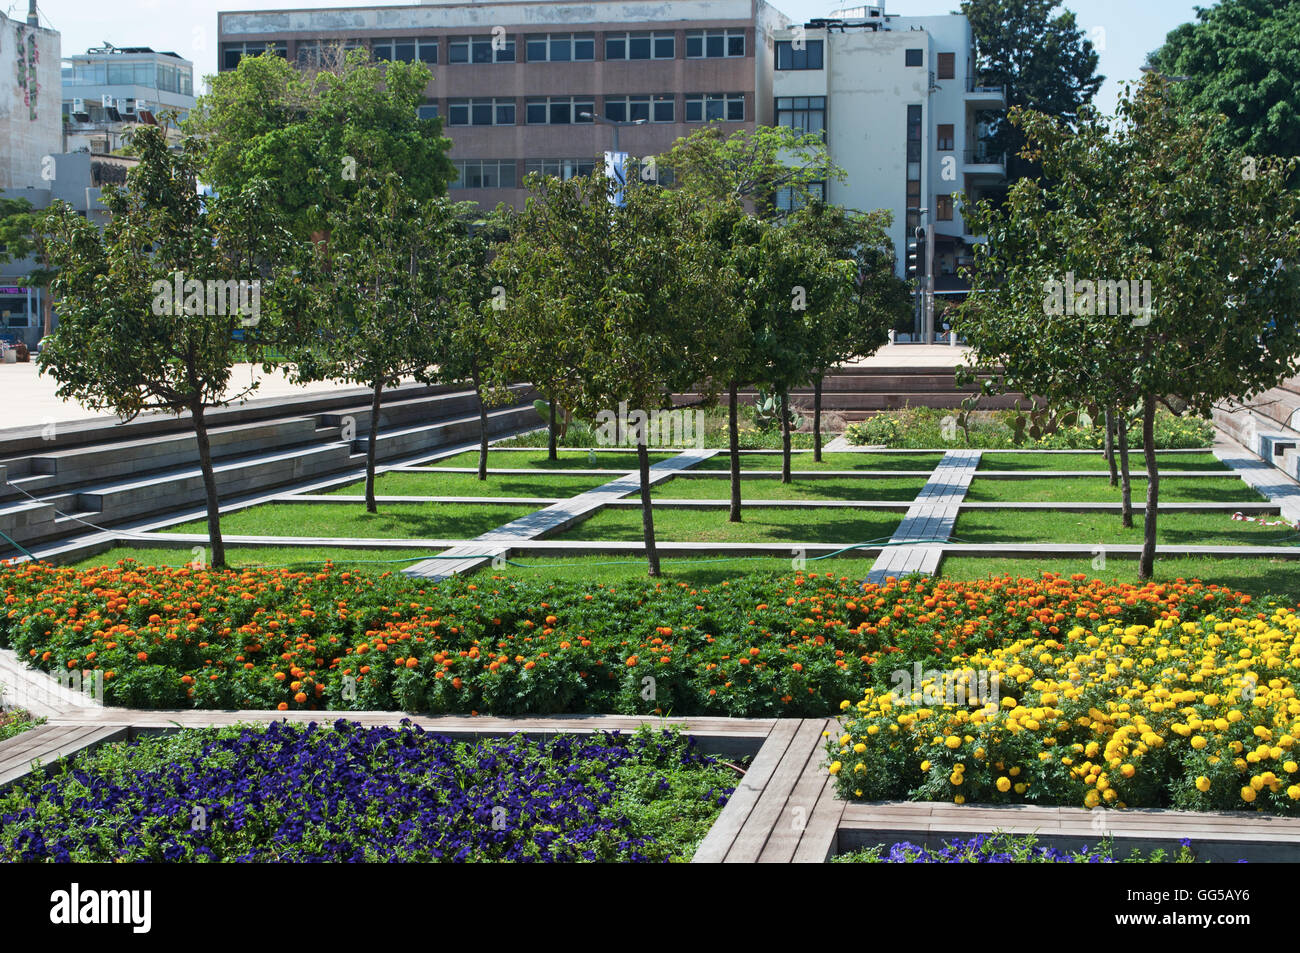 Tel Aviv: view of the gardens of the Habima Theatre, in Habima Square, the national theatre of Israel Stock Photo